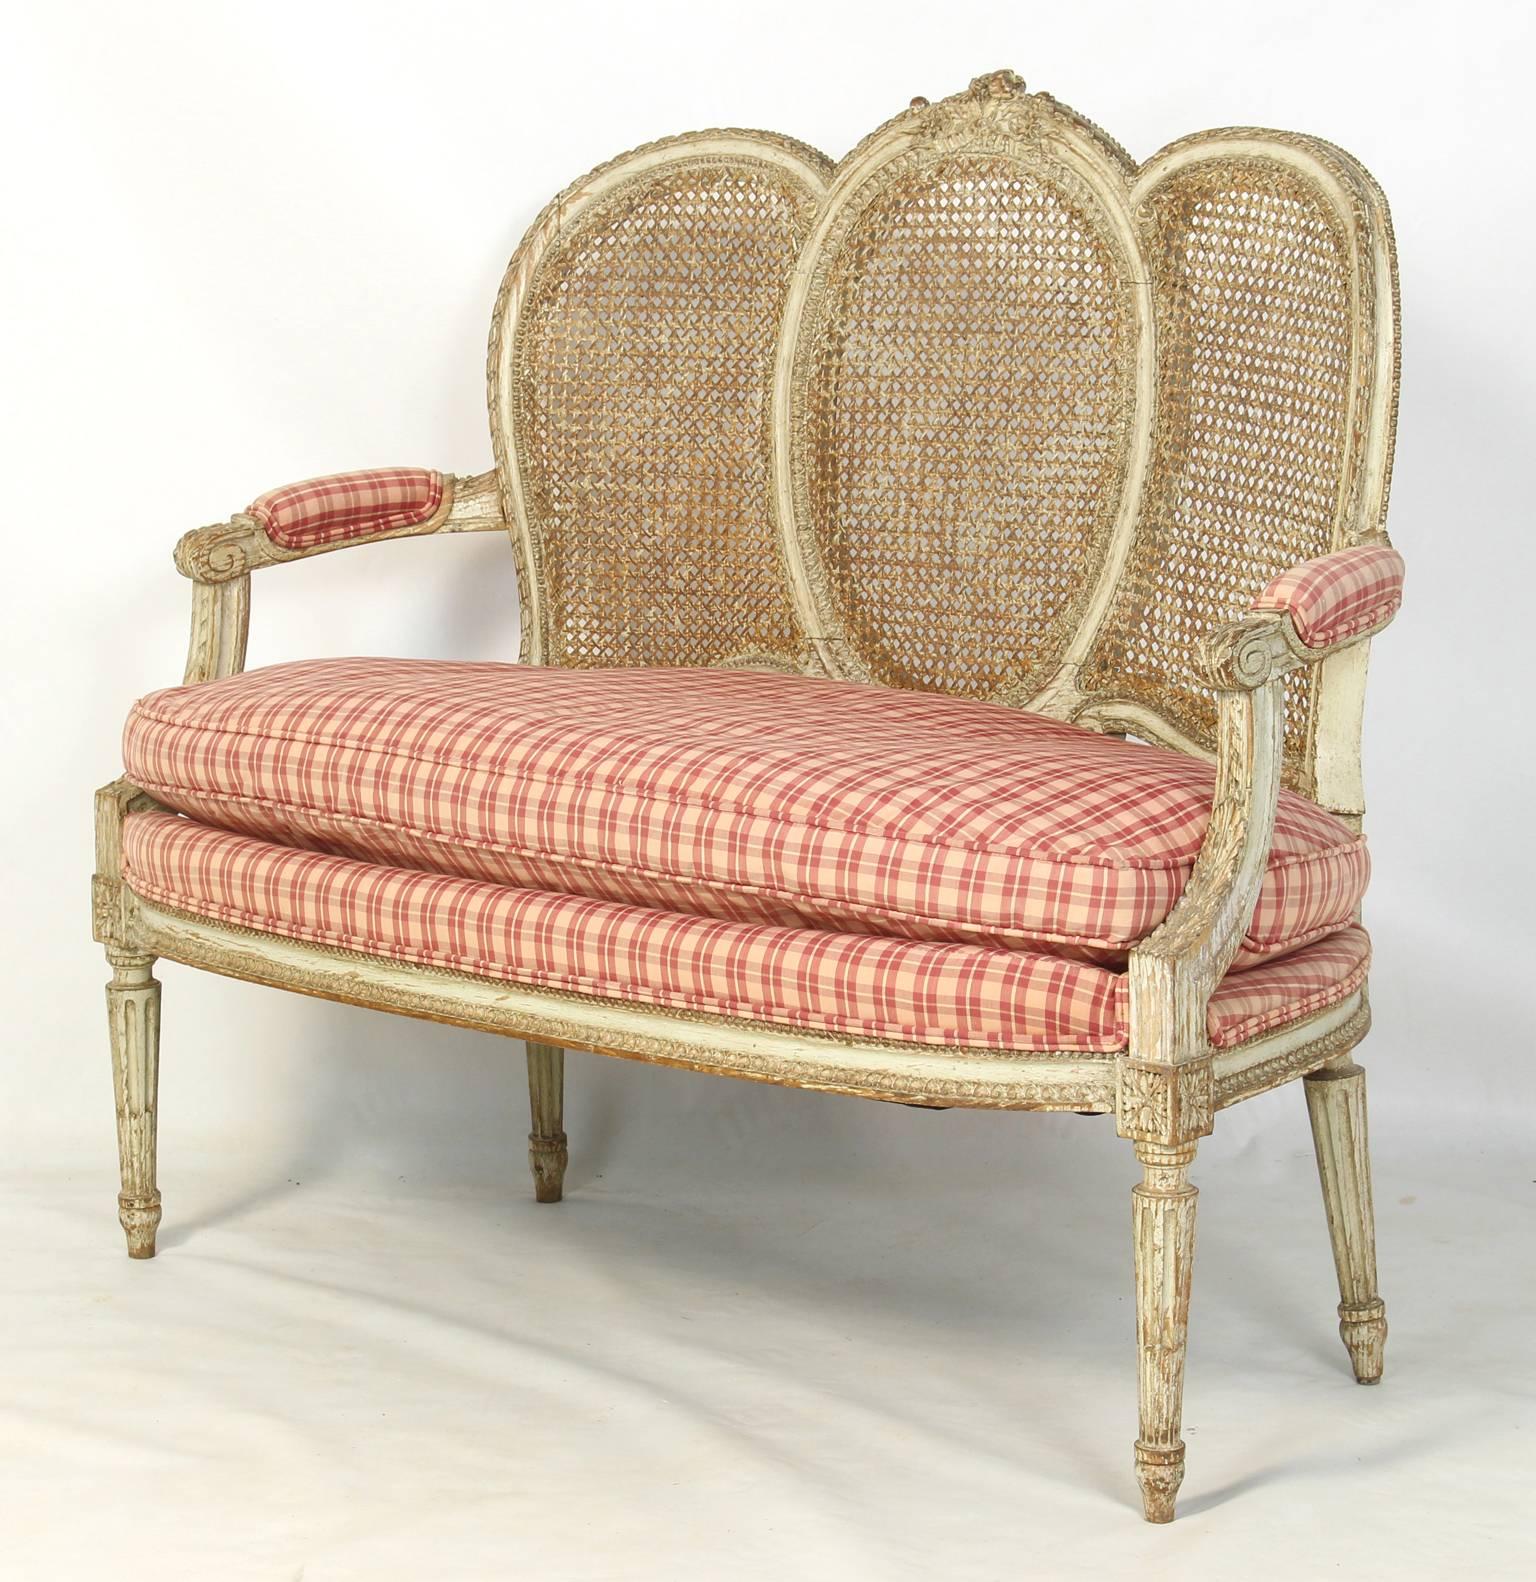 A small and elegant late 19th century. French carved and painted caned back settee with loose down filled cushion.